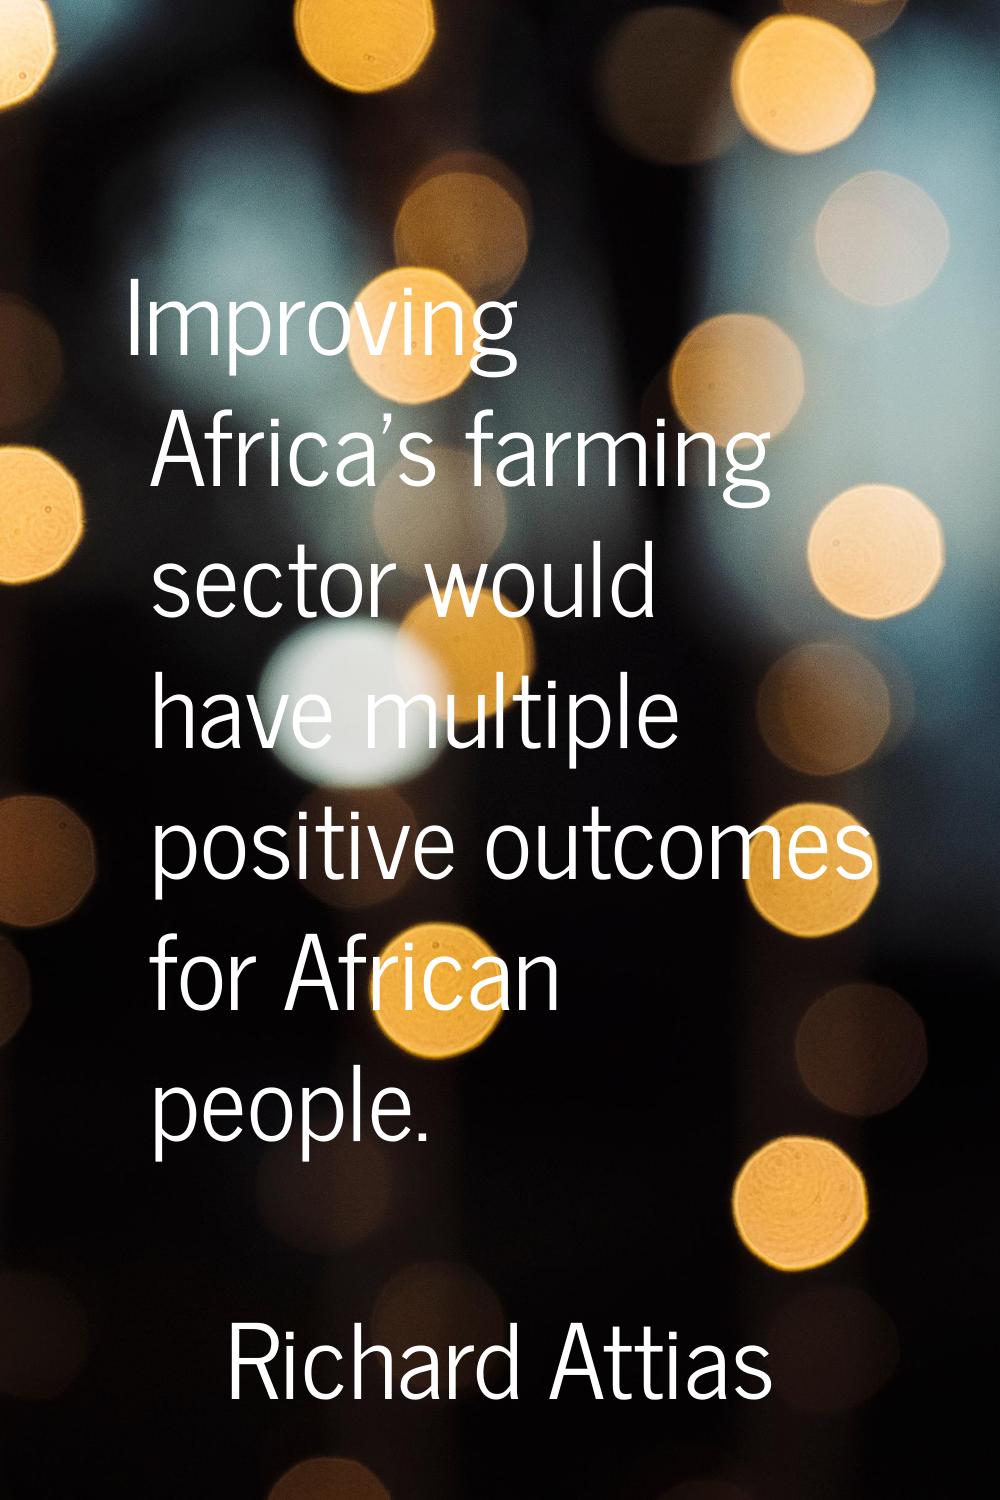 Improving Africa's farming sector would have multiple positive outcomes for African people.